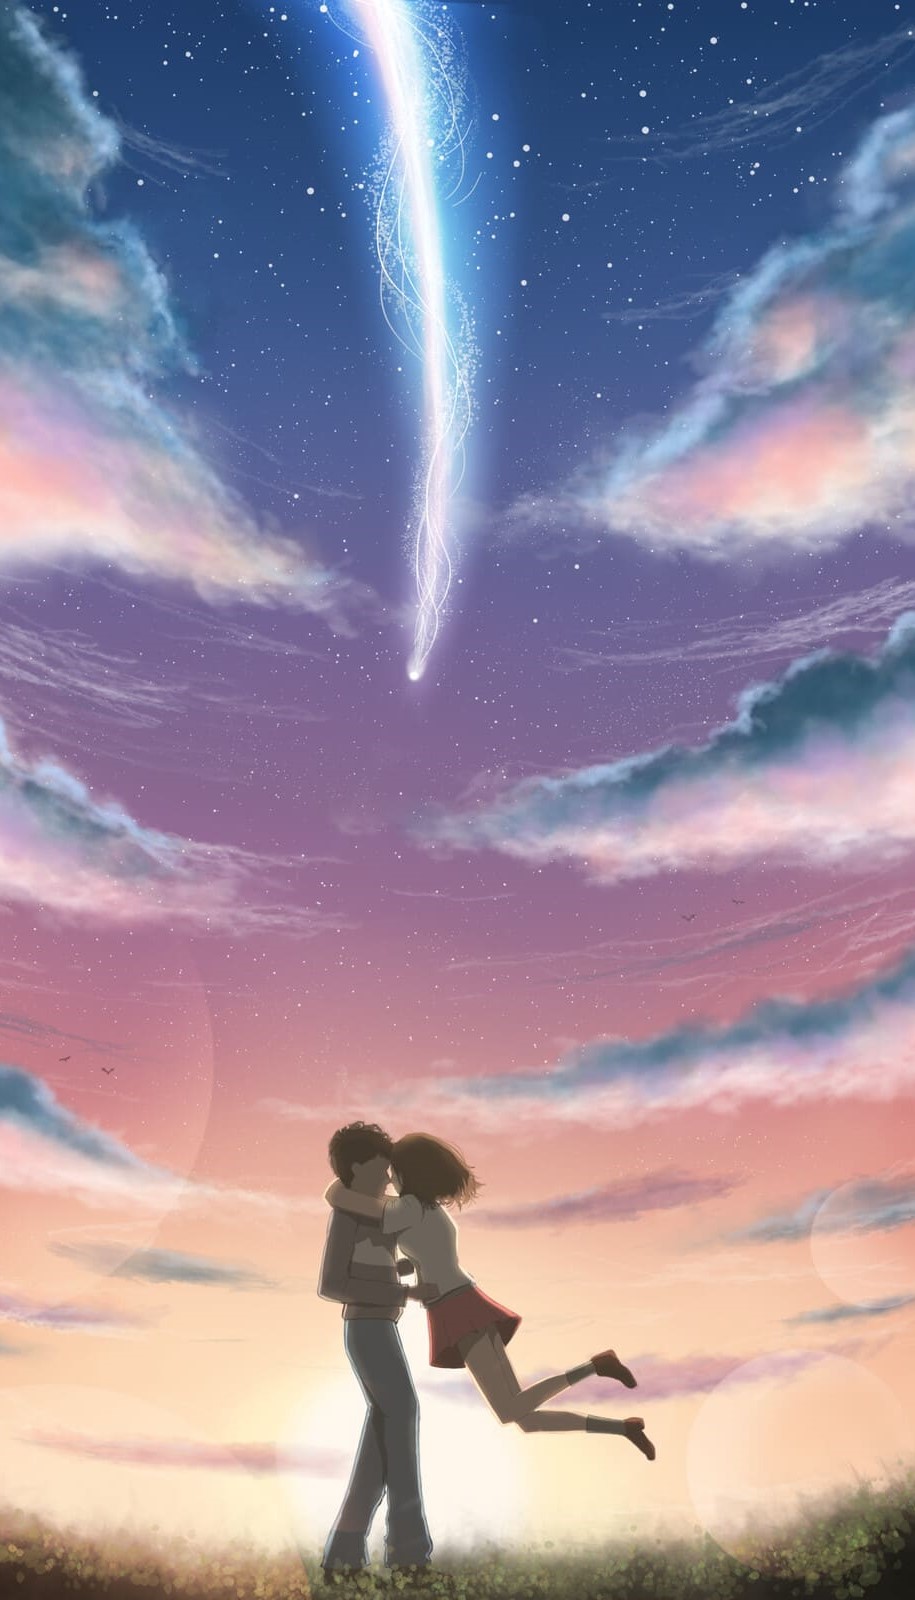 Your Name Wallpapers - Top 35 Best Your Name Backgrounds Download